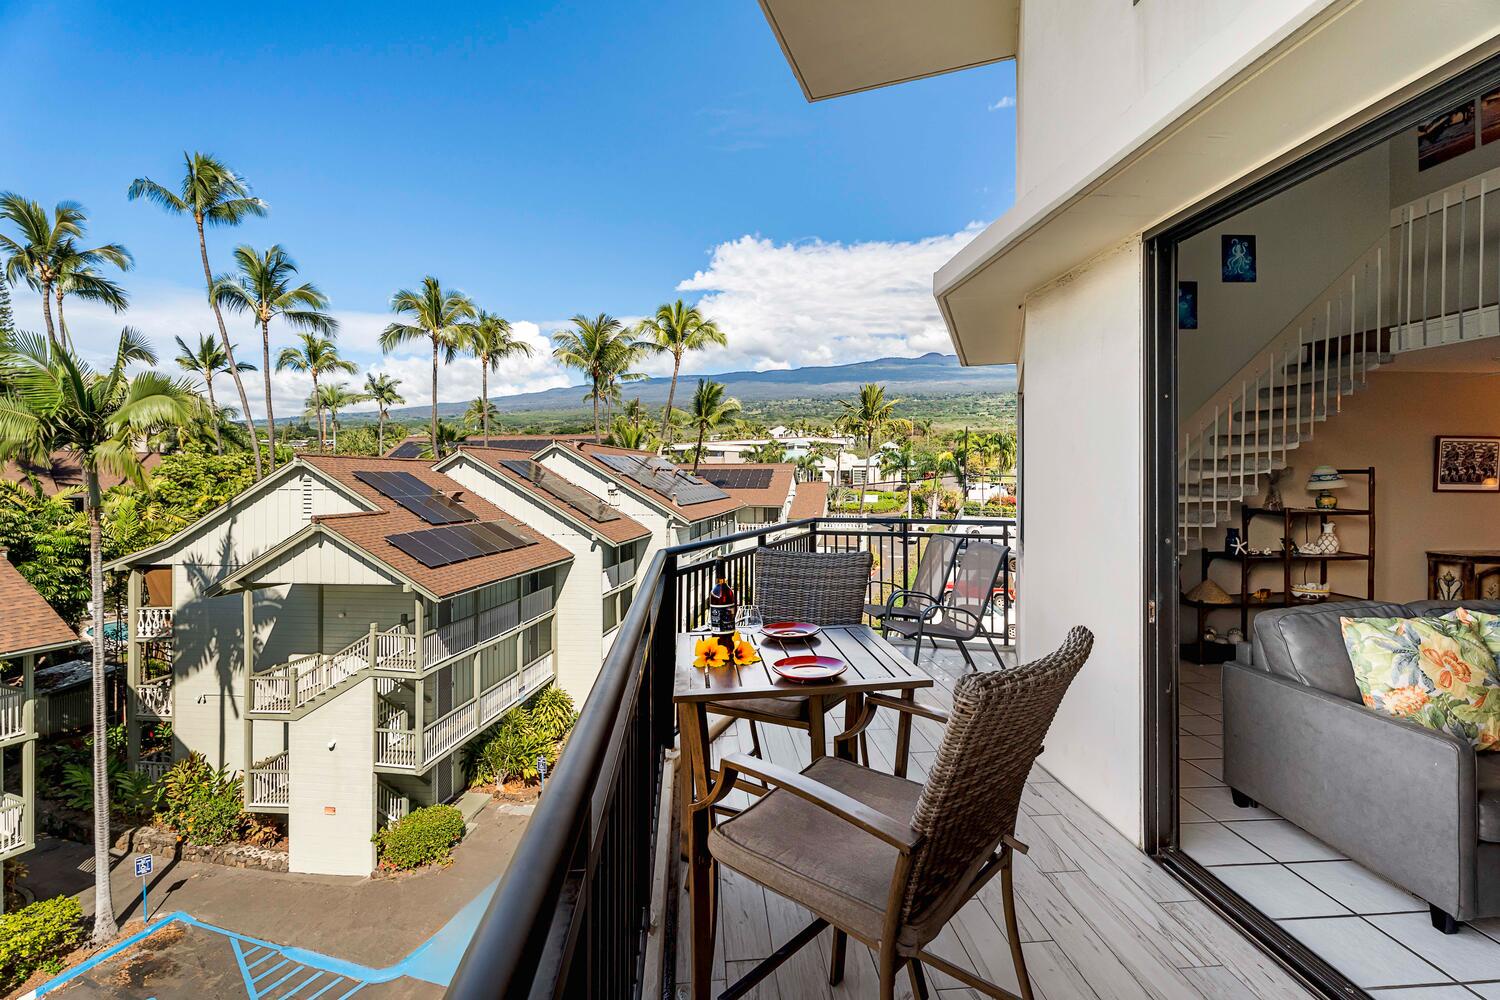 Kailua Kona Vacation Rentals, Kona Alii 512 - Morning chitchats or nightly cheers can happen here.